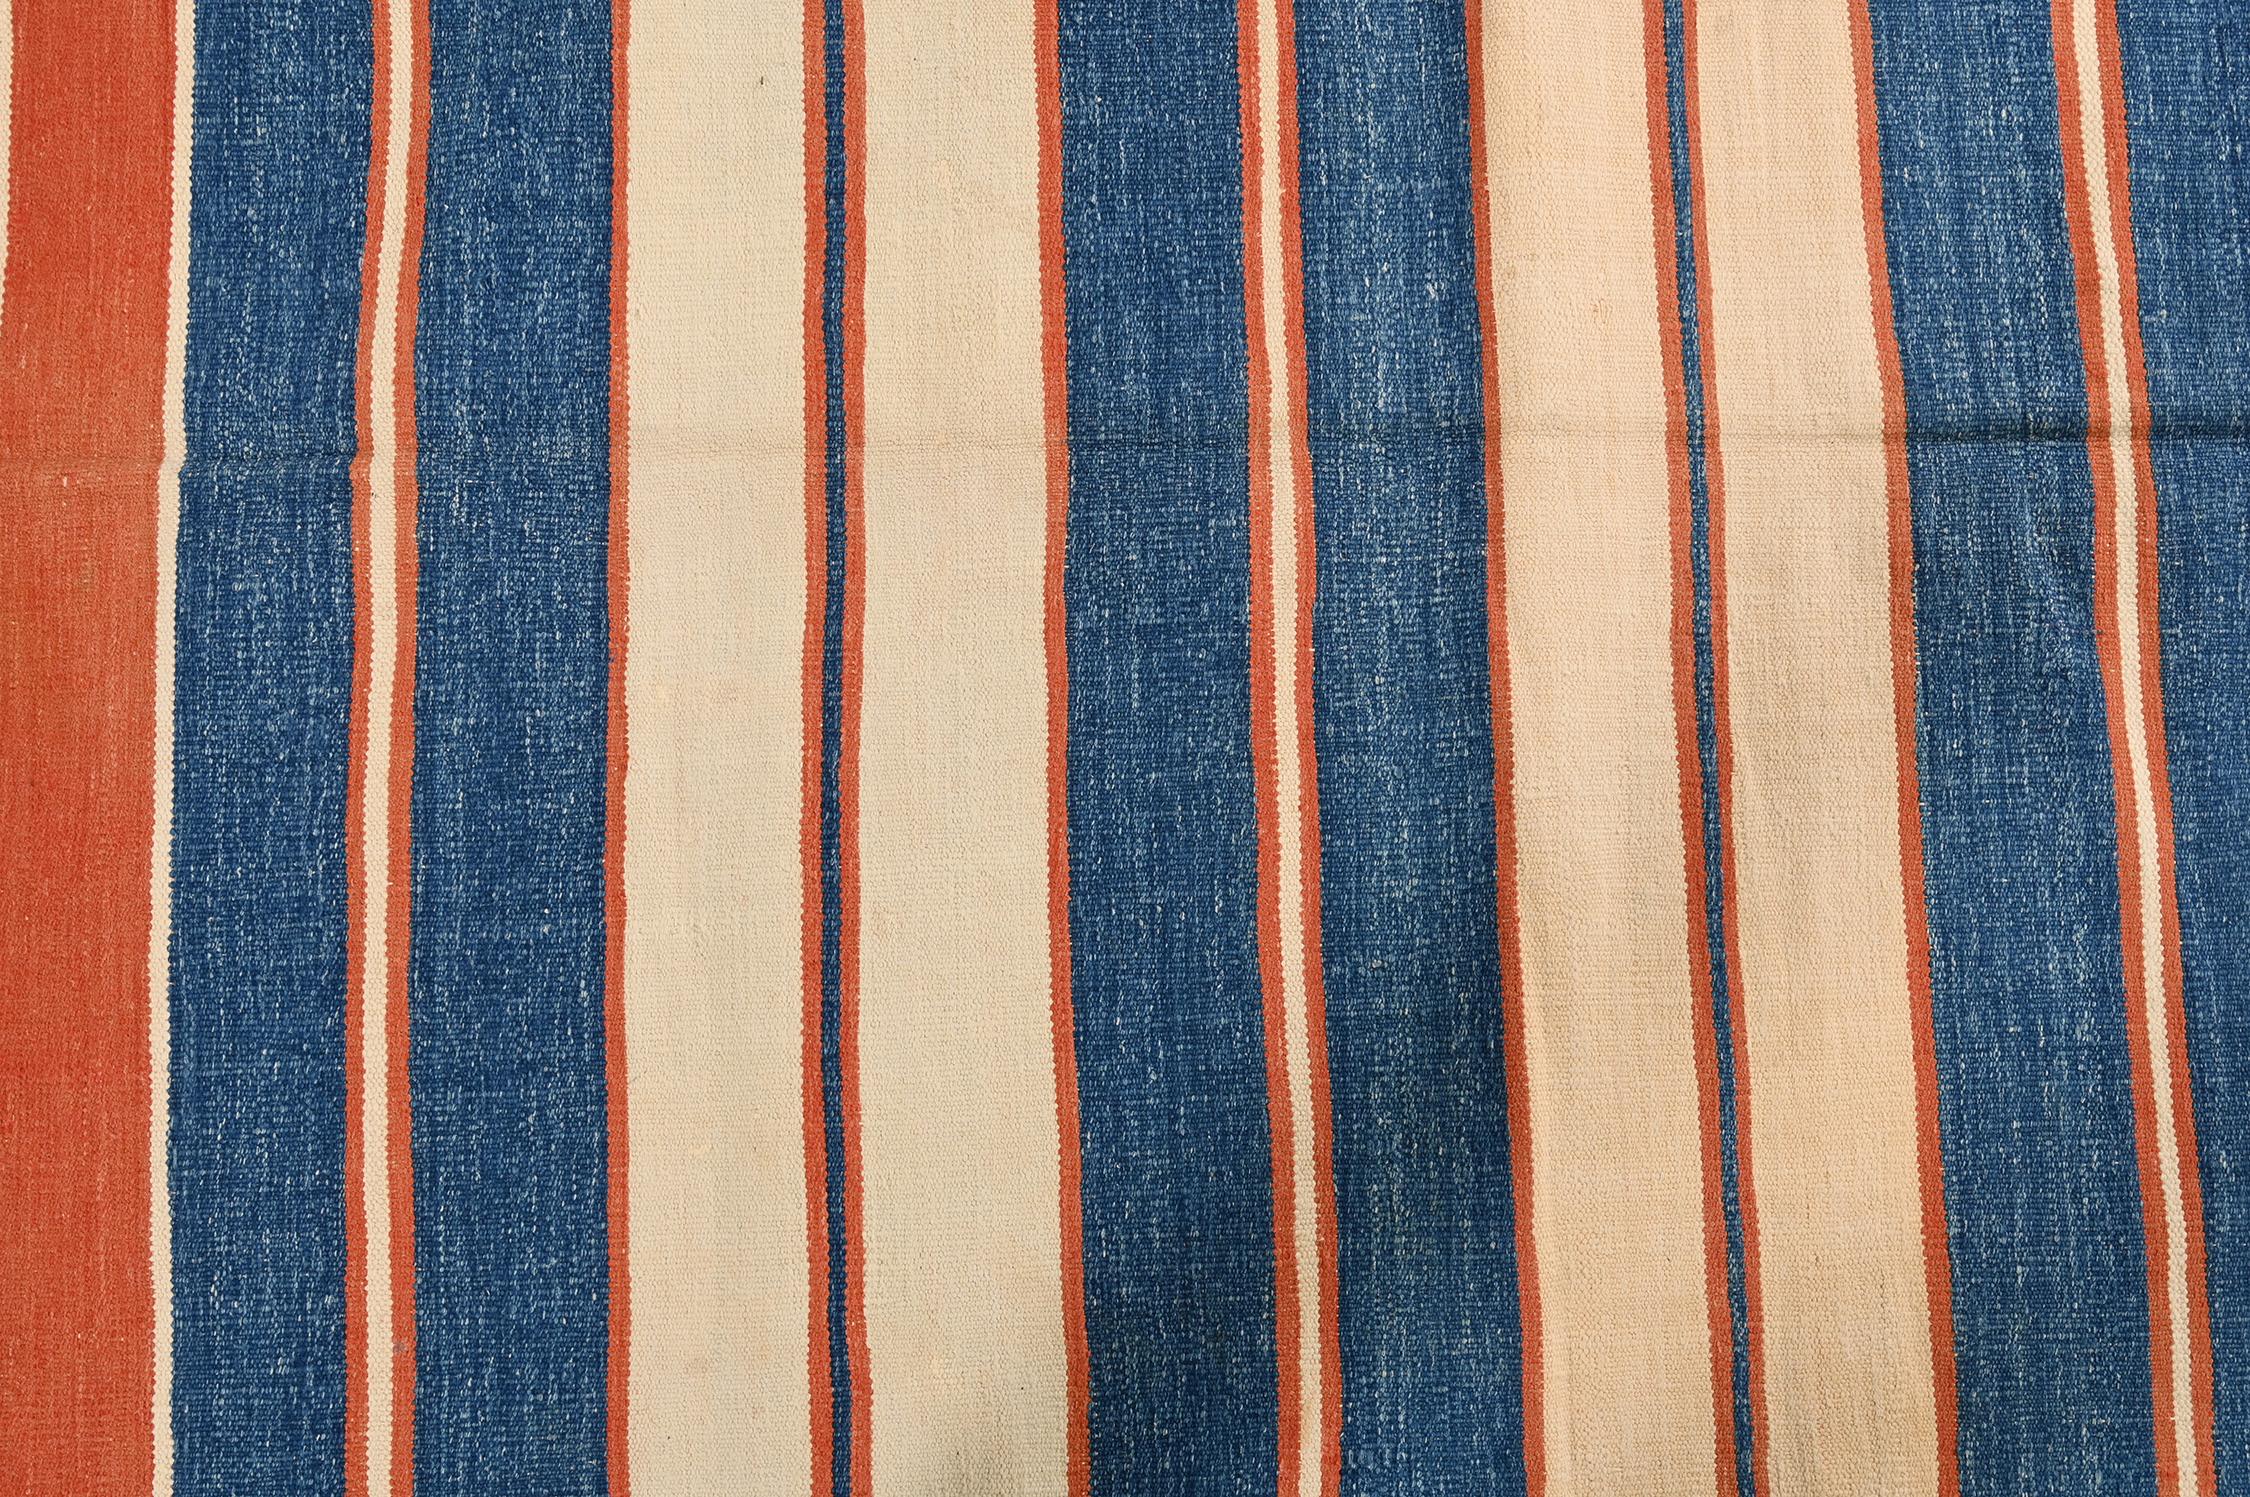 Mid-20th Century Vintage Dhurrie Flat Weave in Blue and Orange Stripes Patterns by Rug & Kilim For Sale